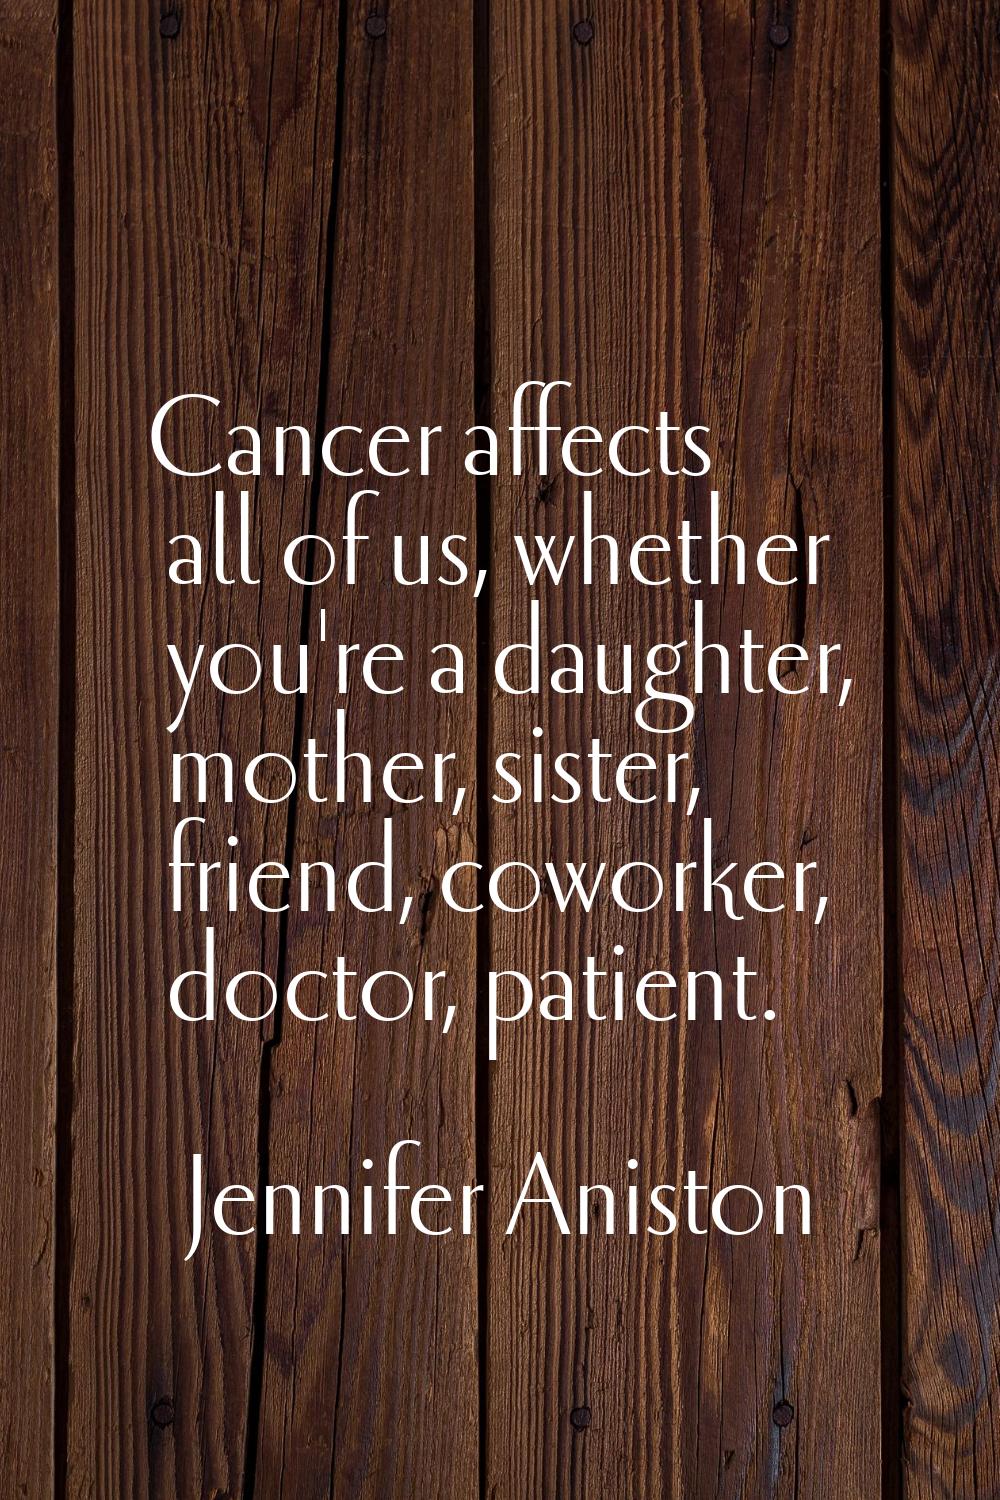 Cancer affects all of us, whether you're a daughter, mother, sister, friend, coworker, doctor, pati